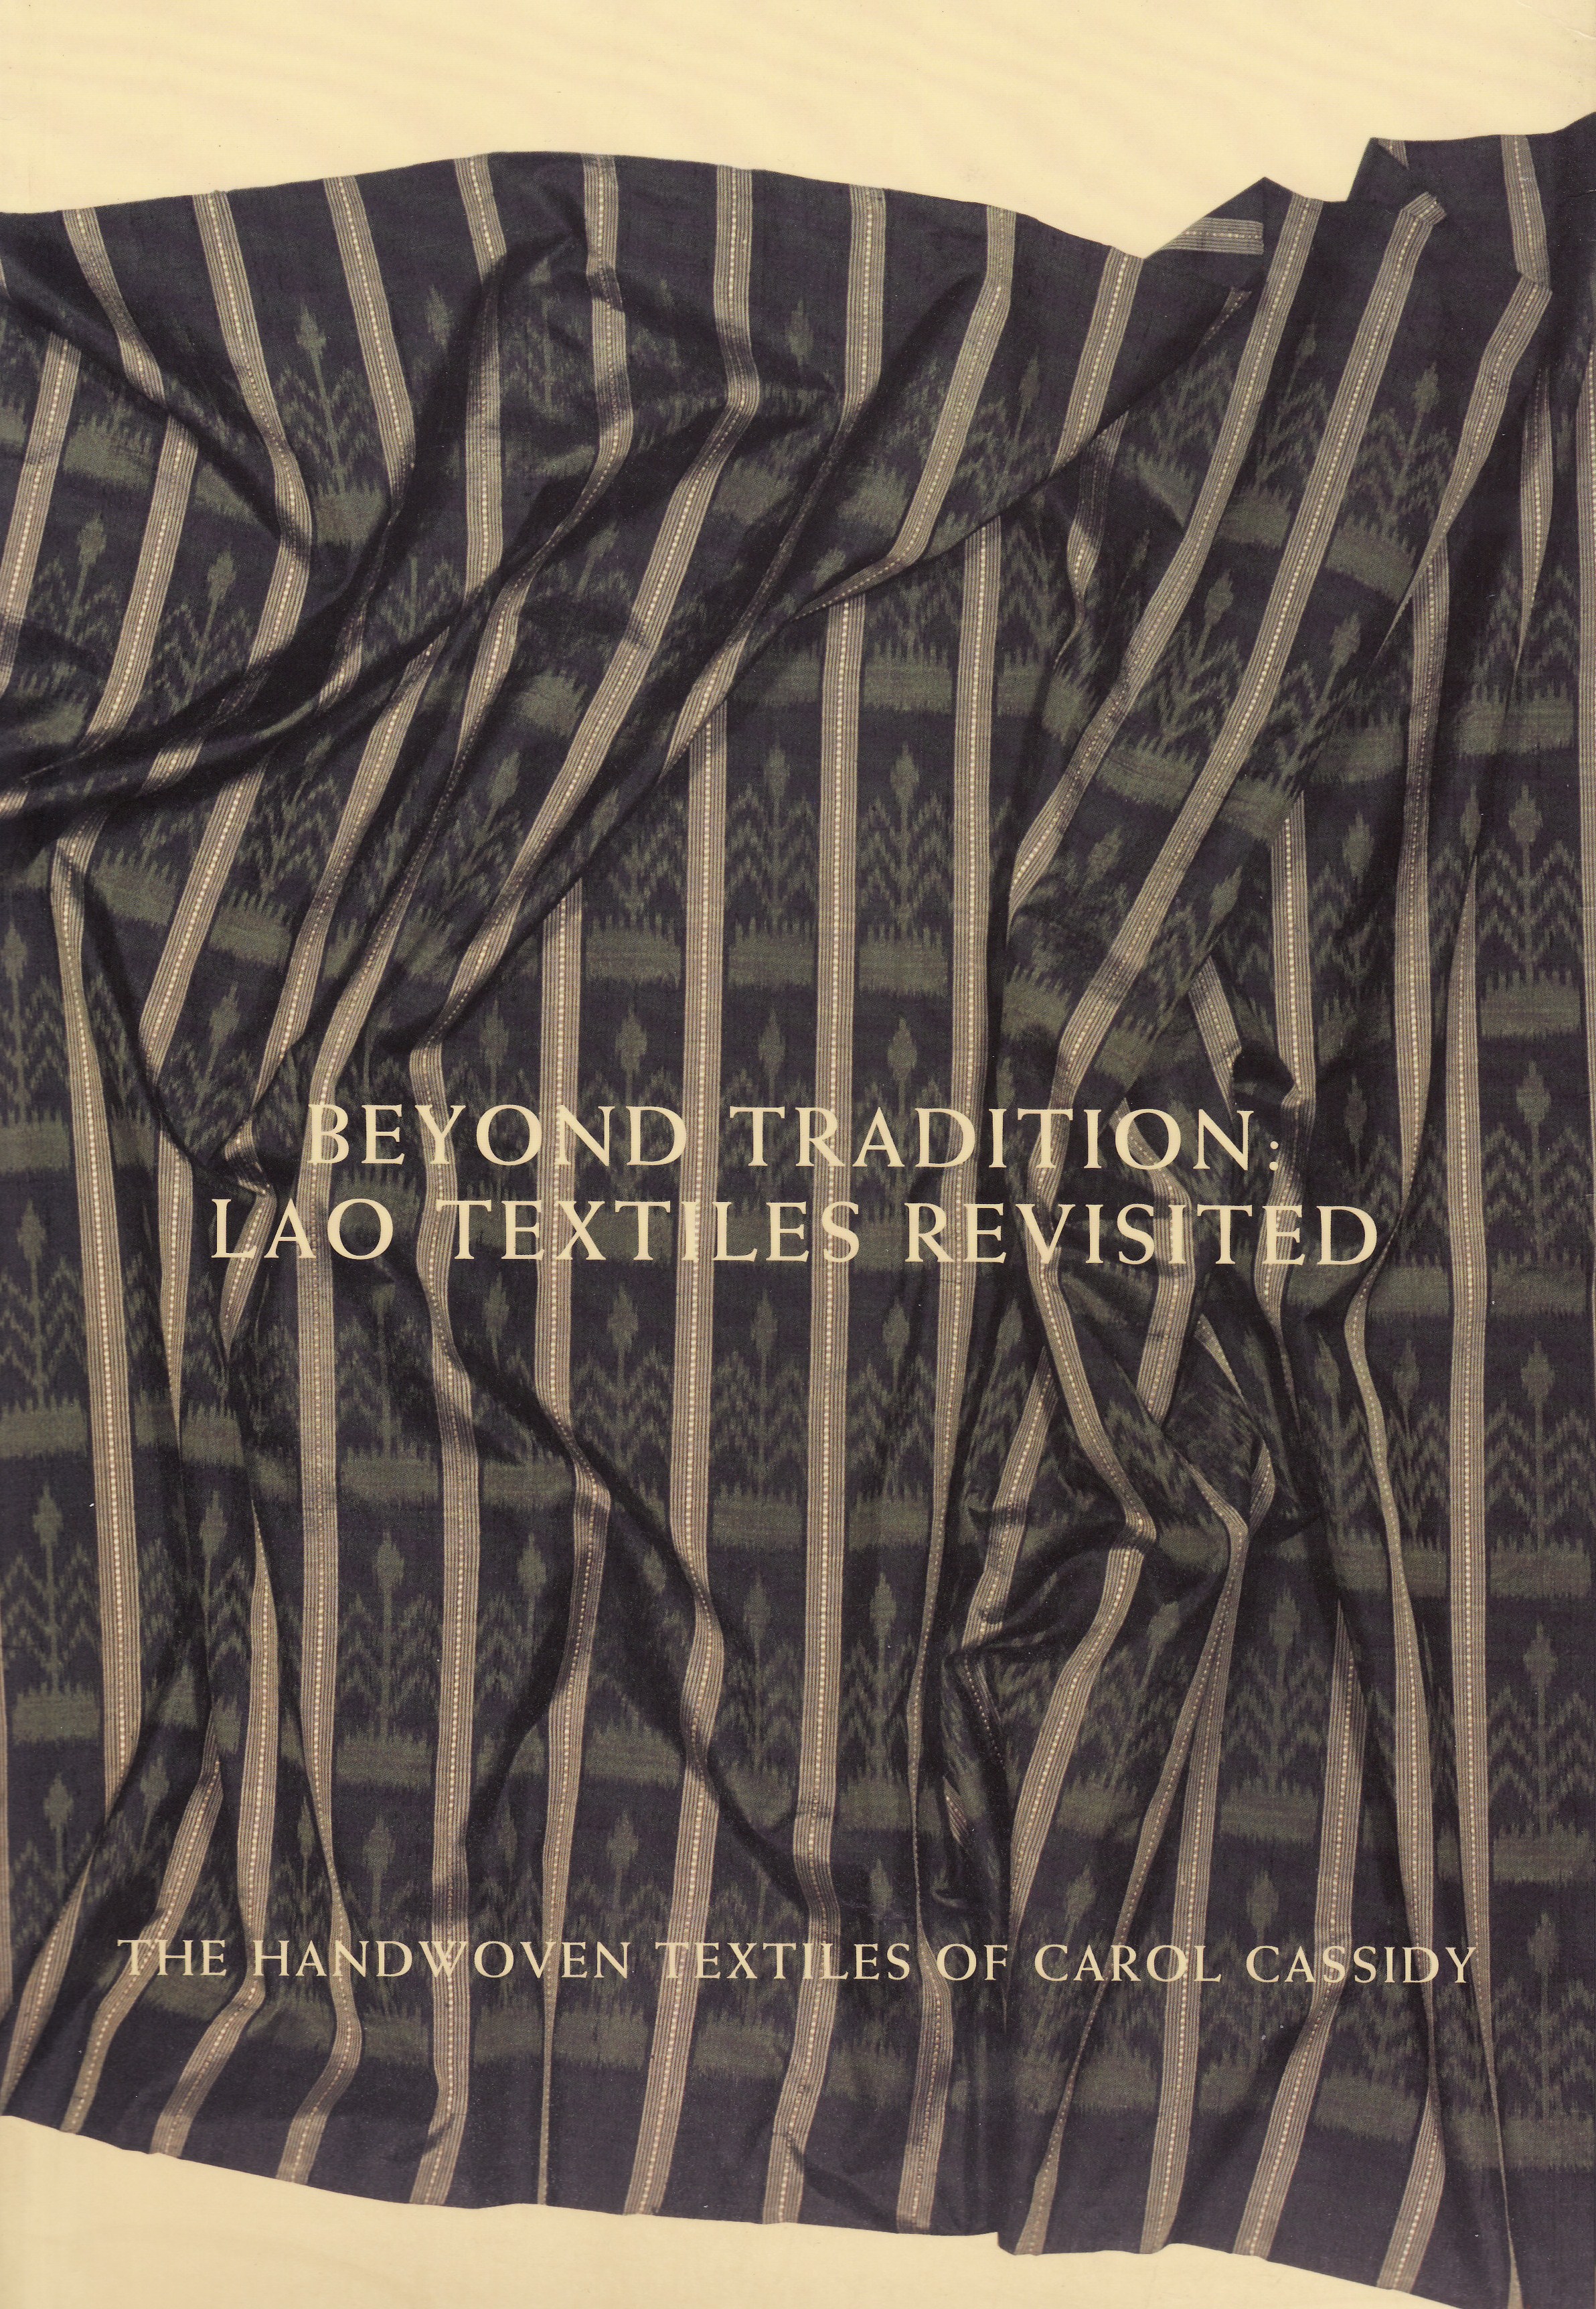 Beyond Tradition: Lao Textiles Revisited